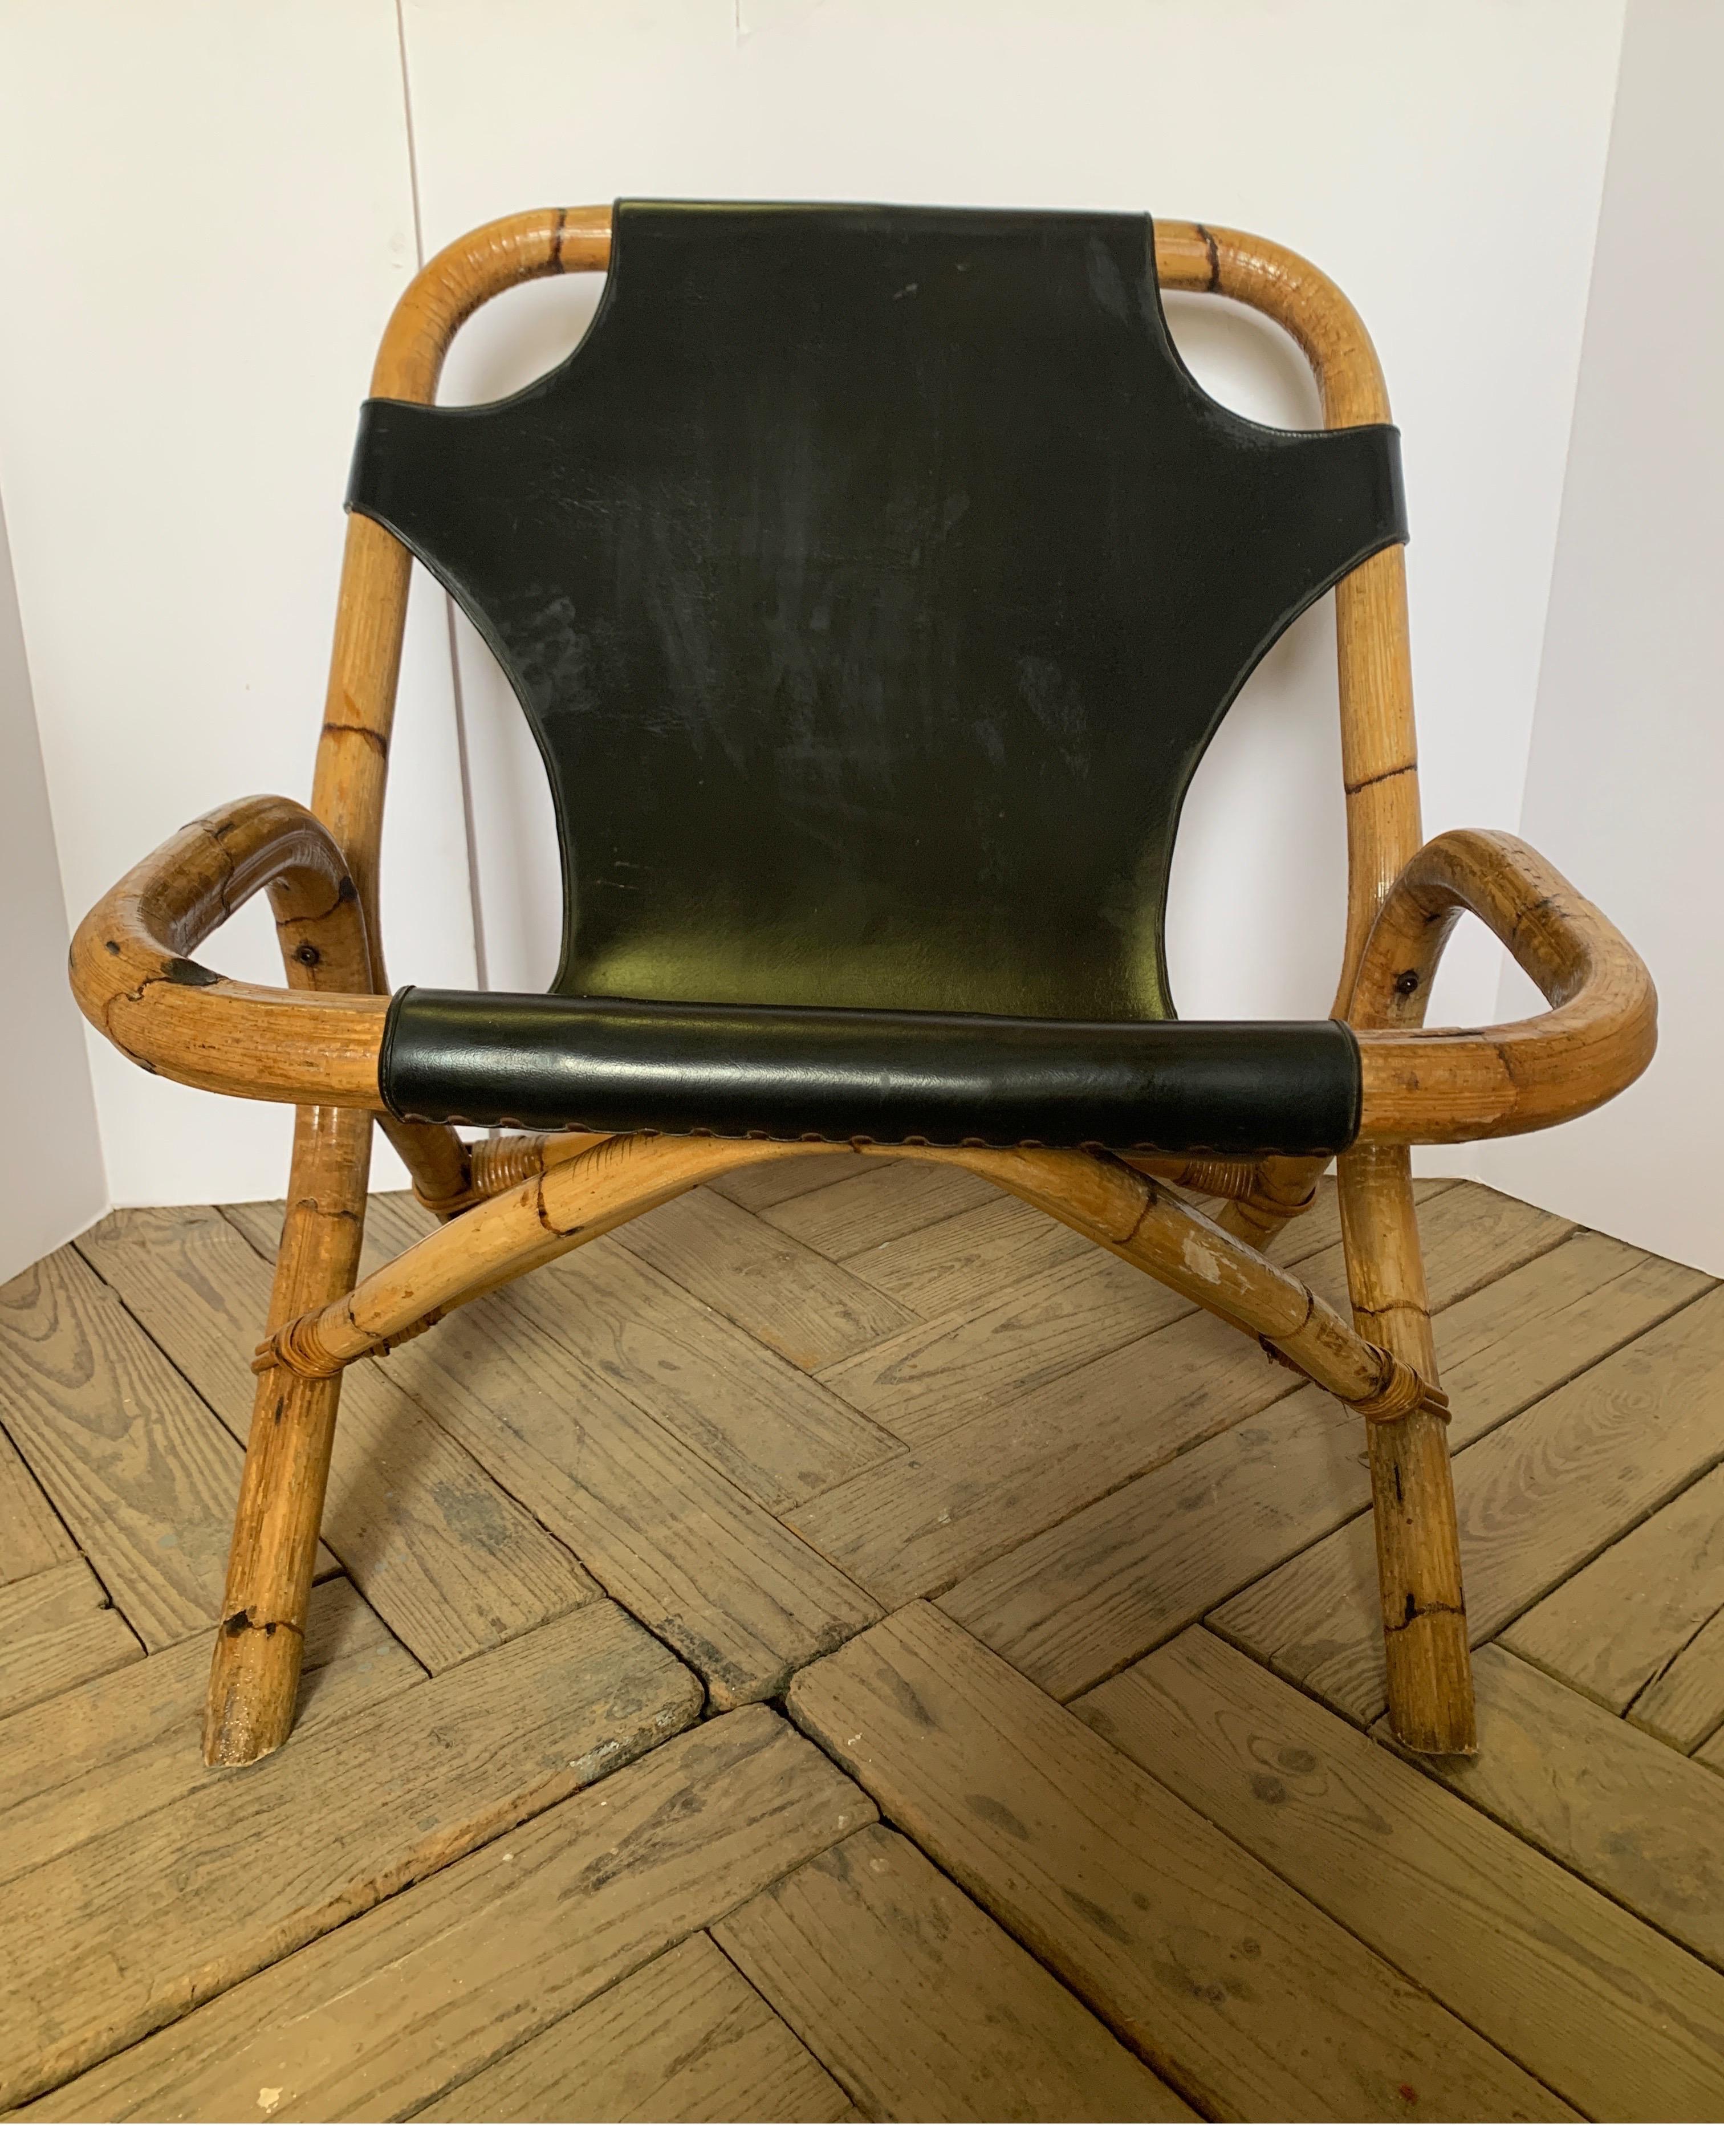 This is a super chic vintage chair from Spain. It's great next to a short cocktail table. It's in great condition as well with just a few small scuffs on the leather that I have shown in photos.